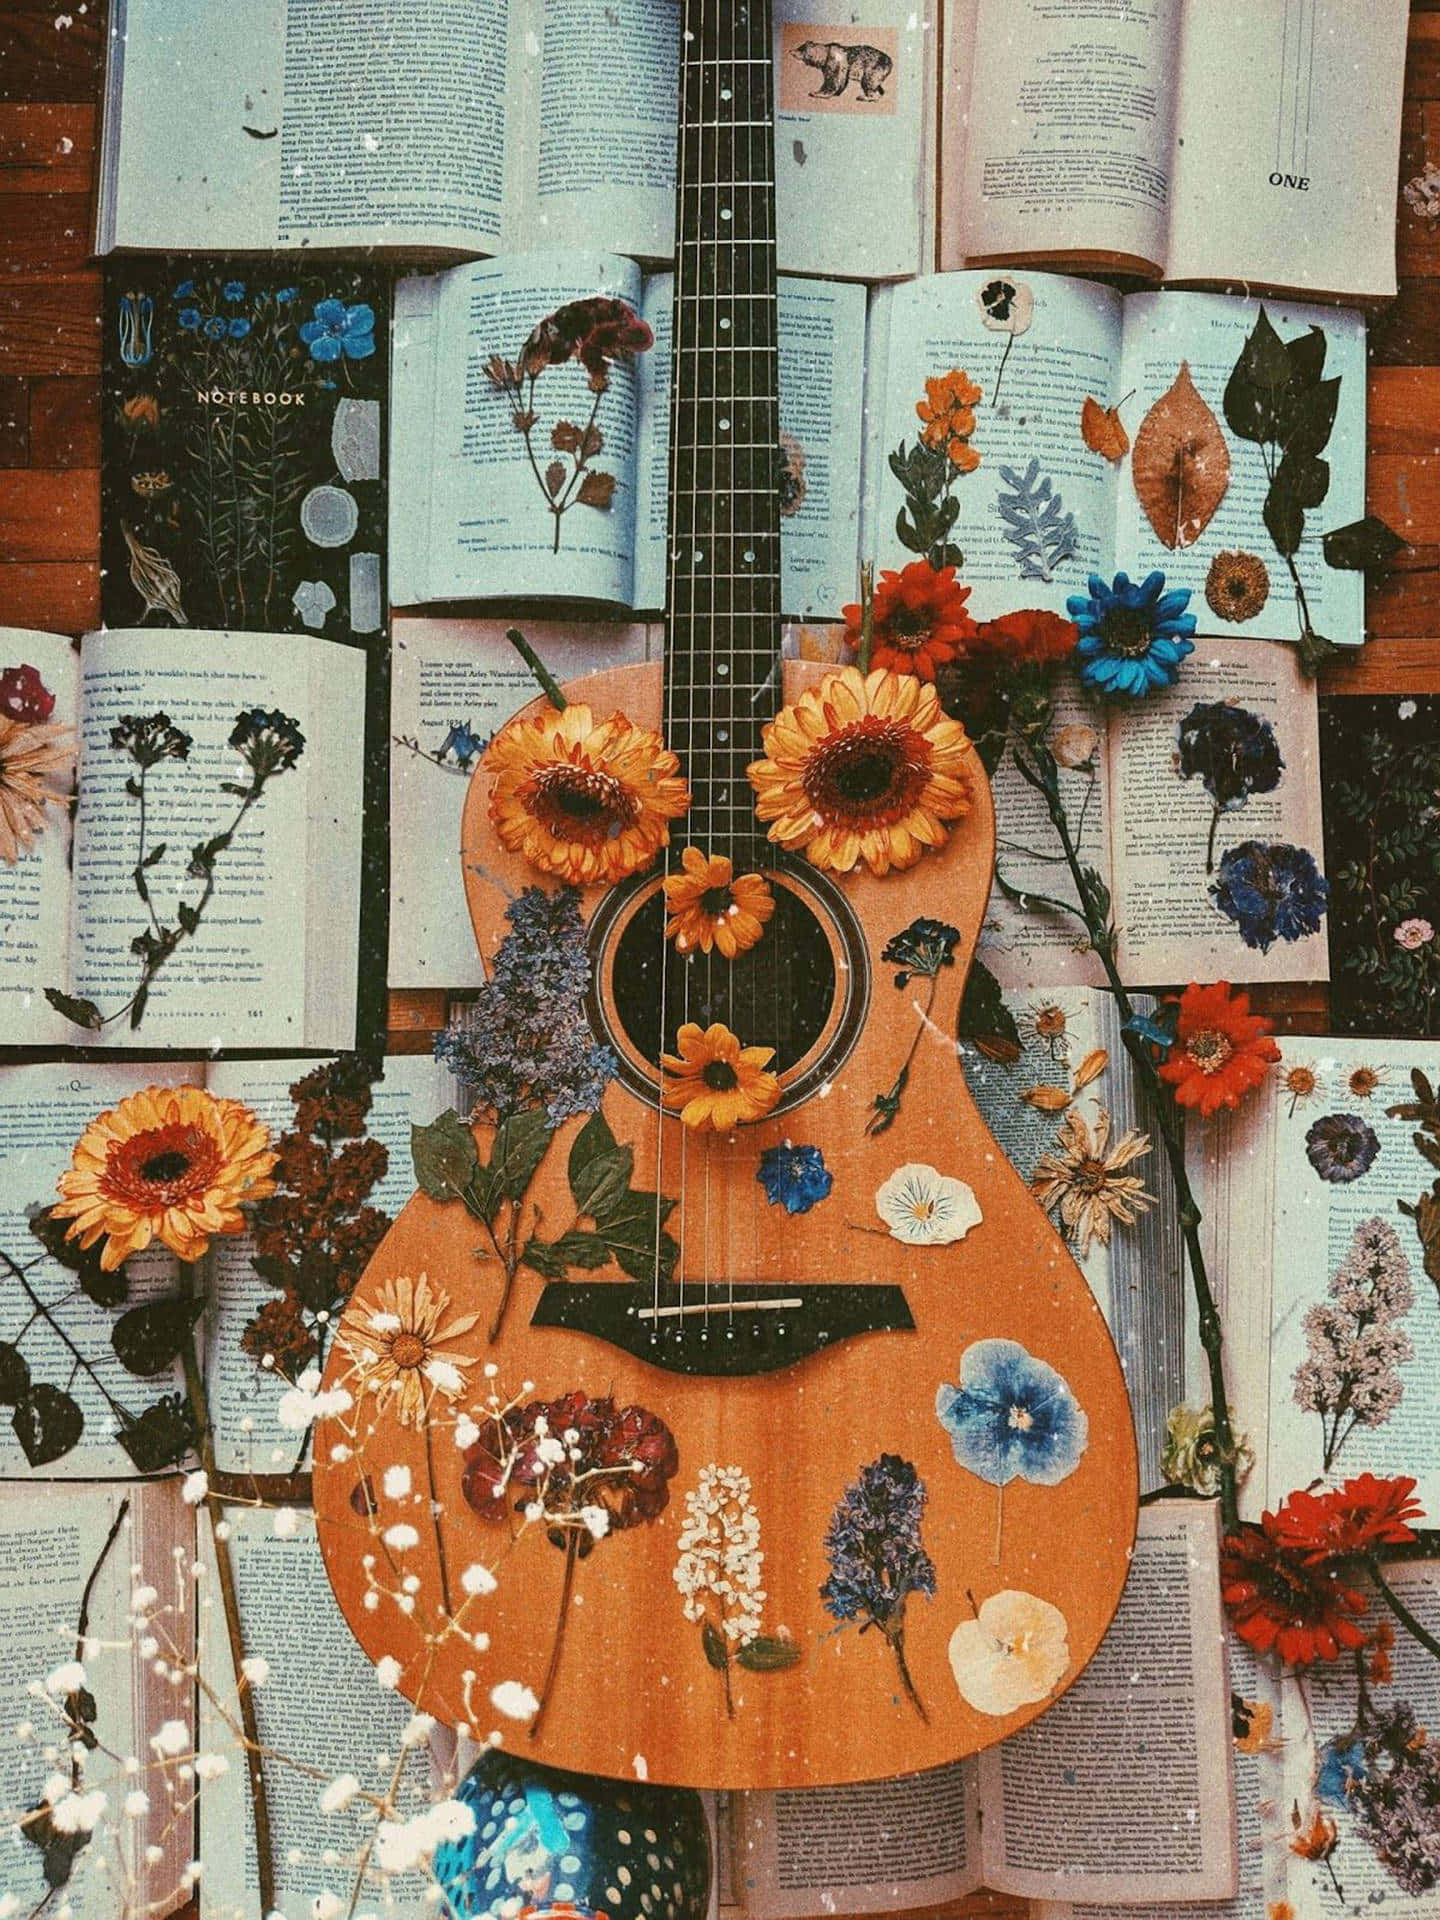 A guitar with flowers on it and books - Guitar